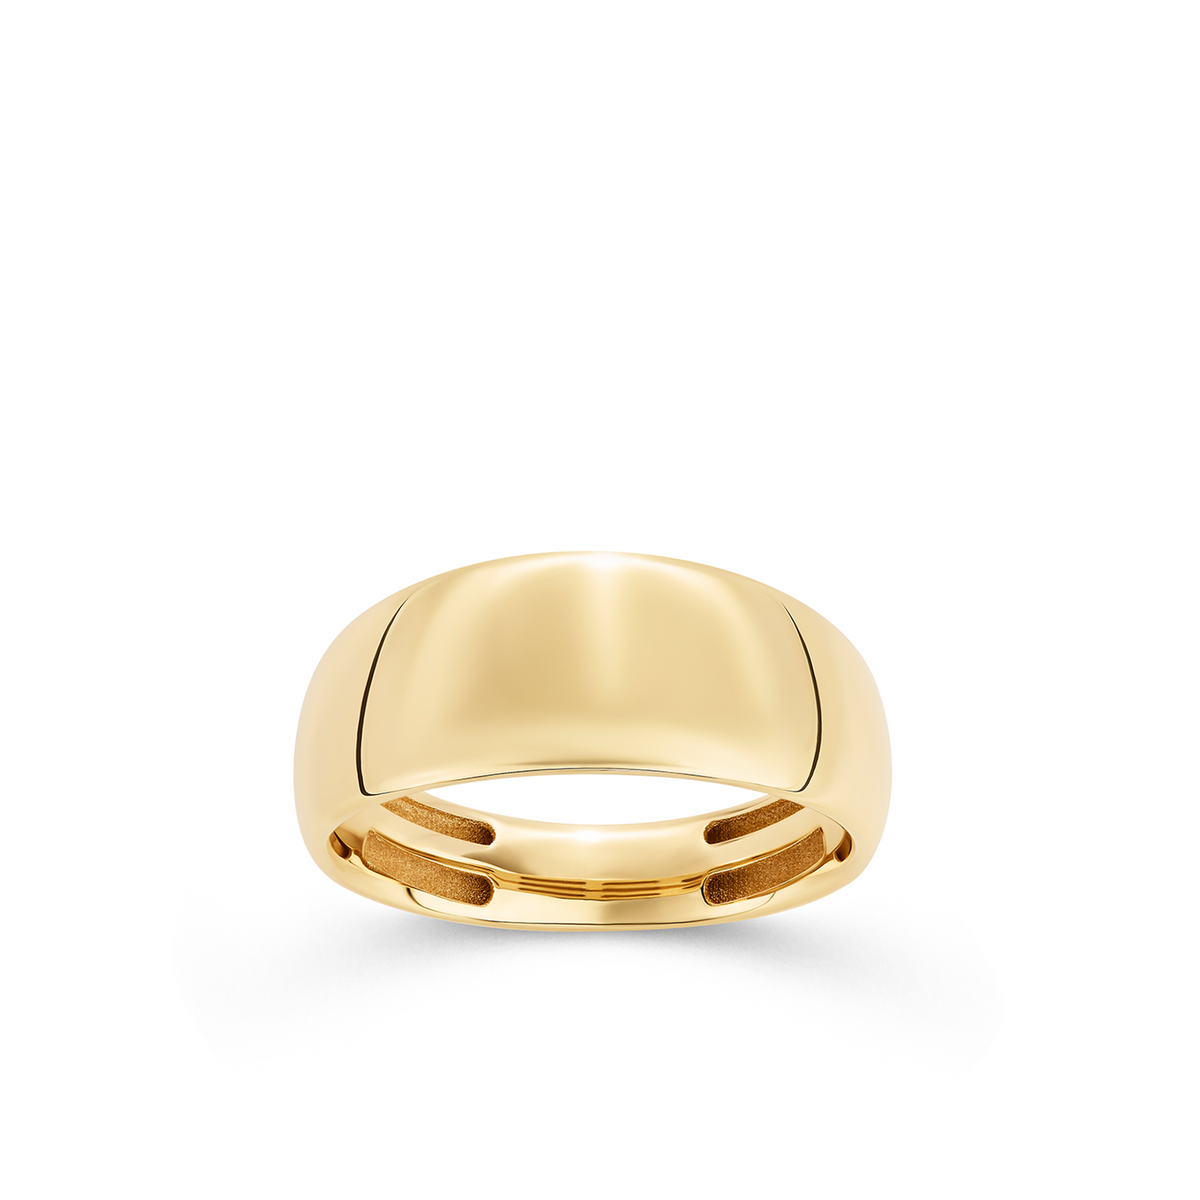 Dress Ring in 9ct Yellow Gold